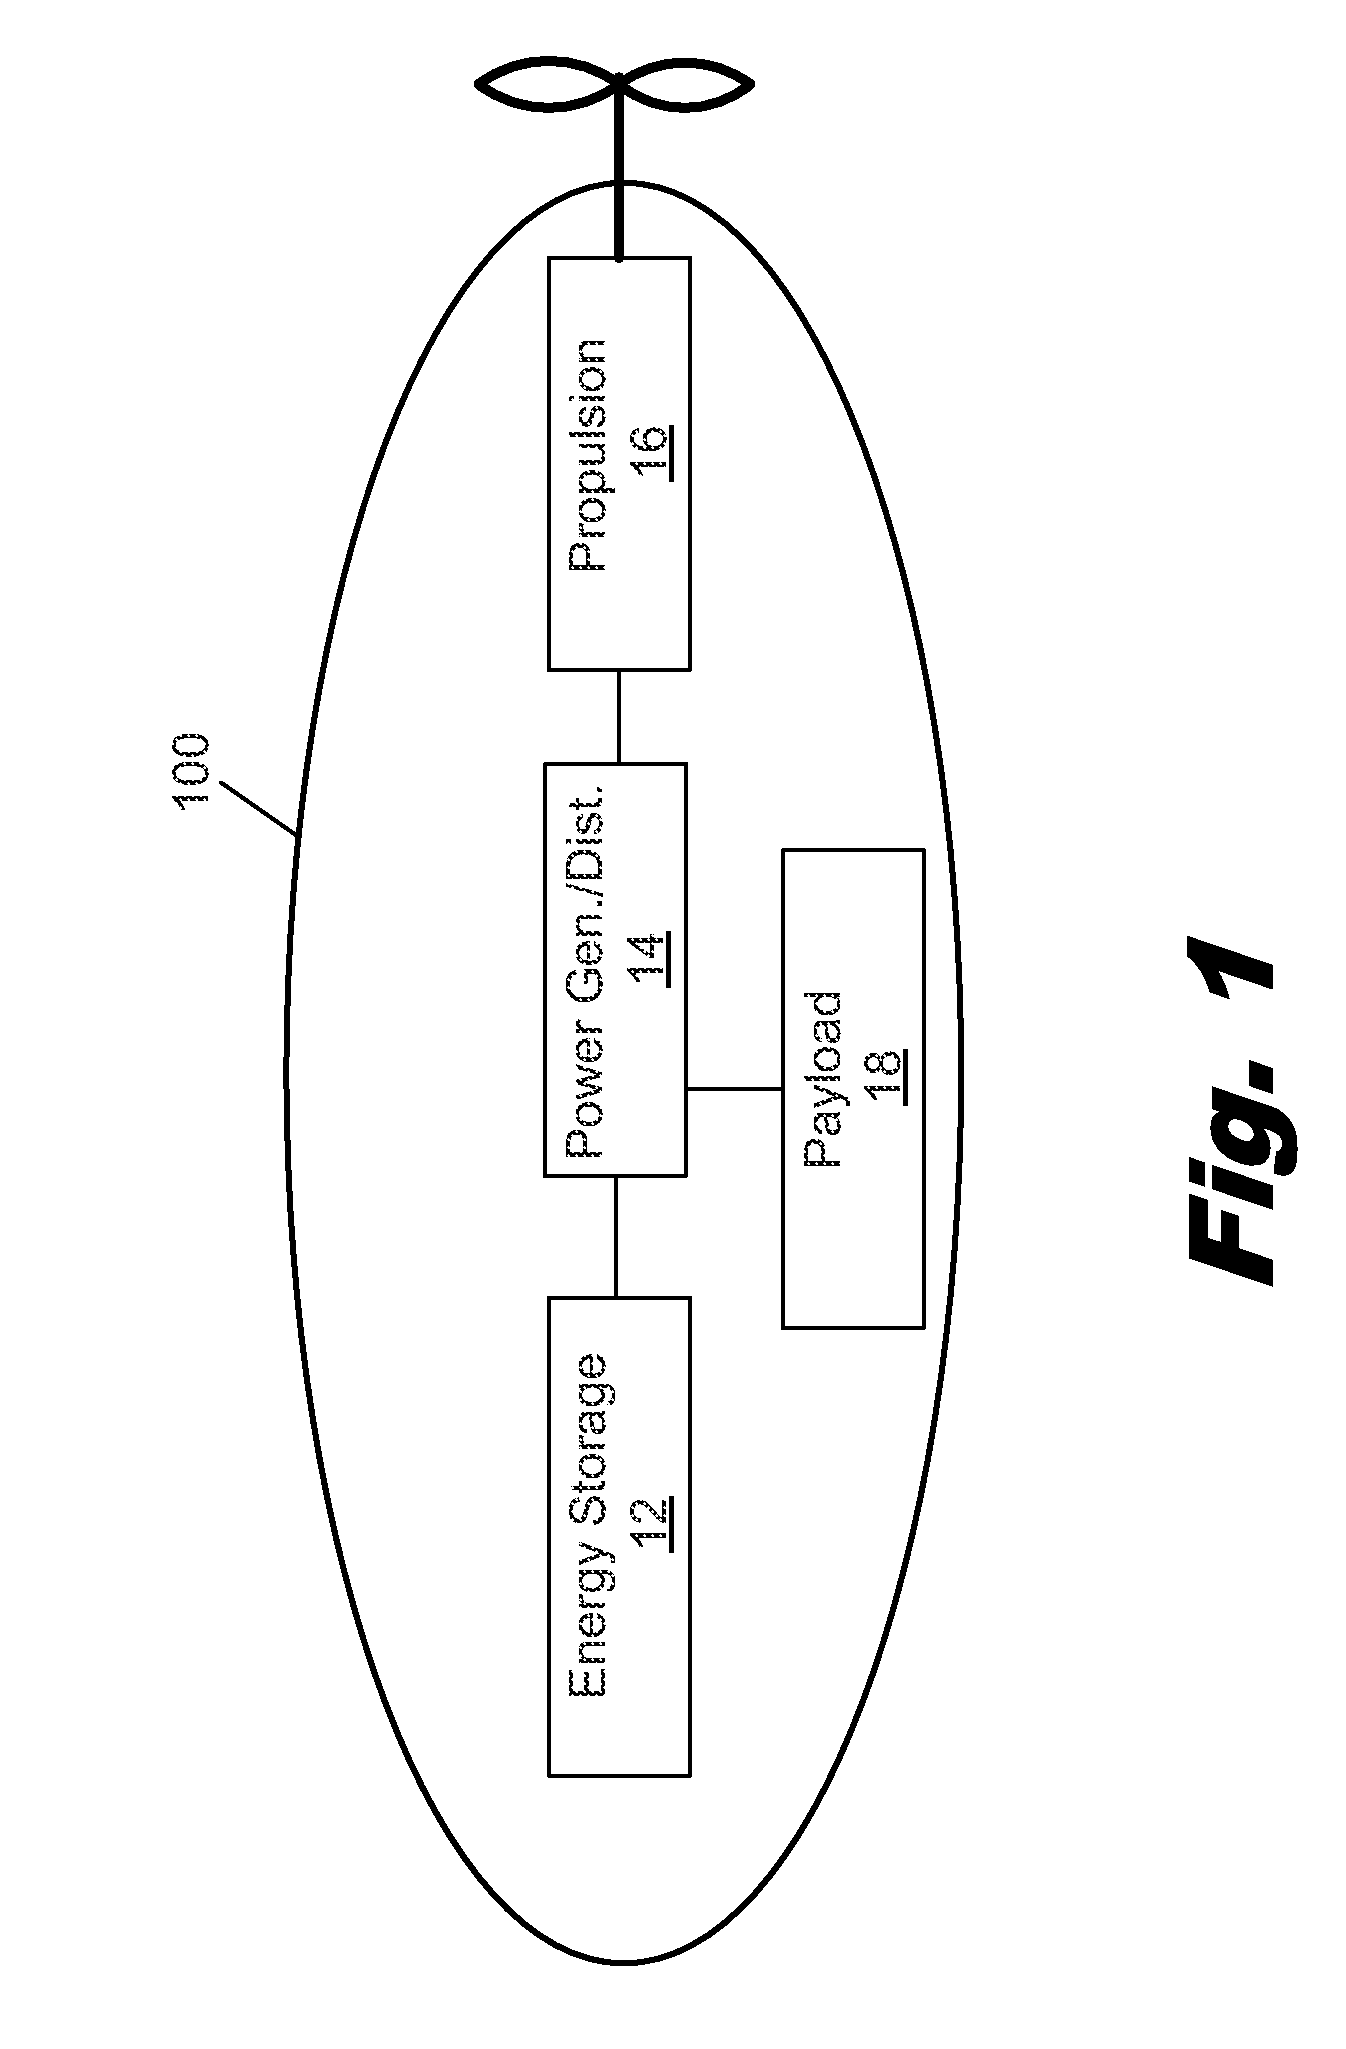 Systems and methods for long endurance airship operations